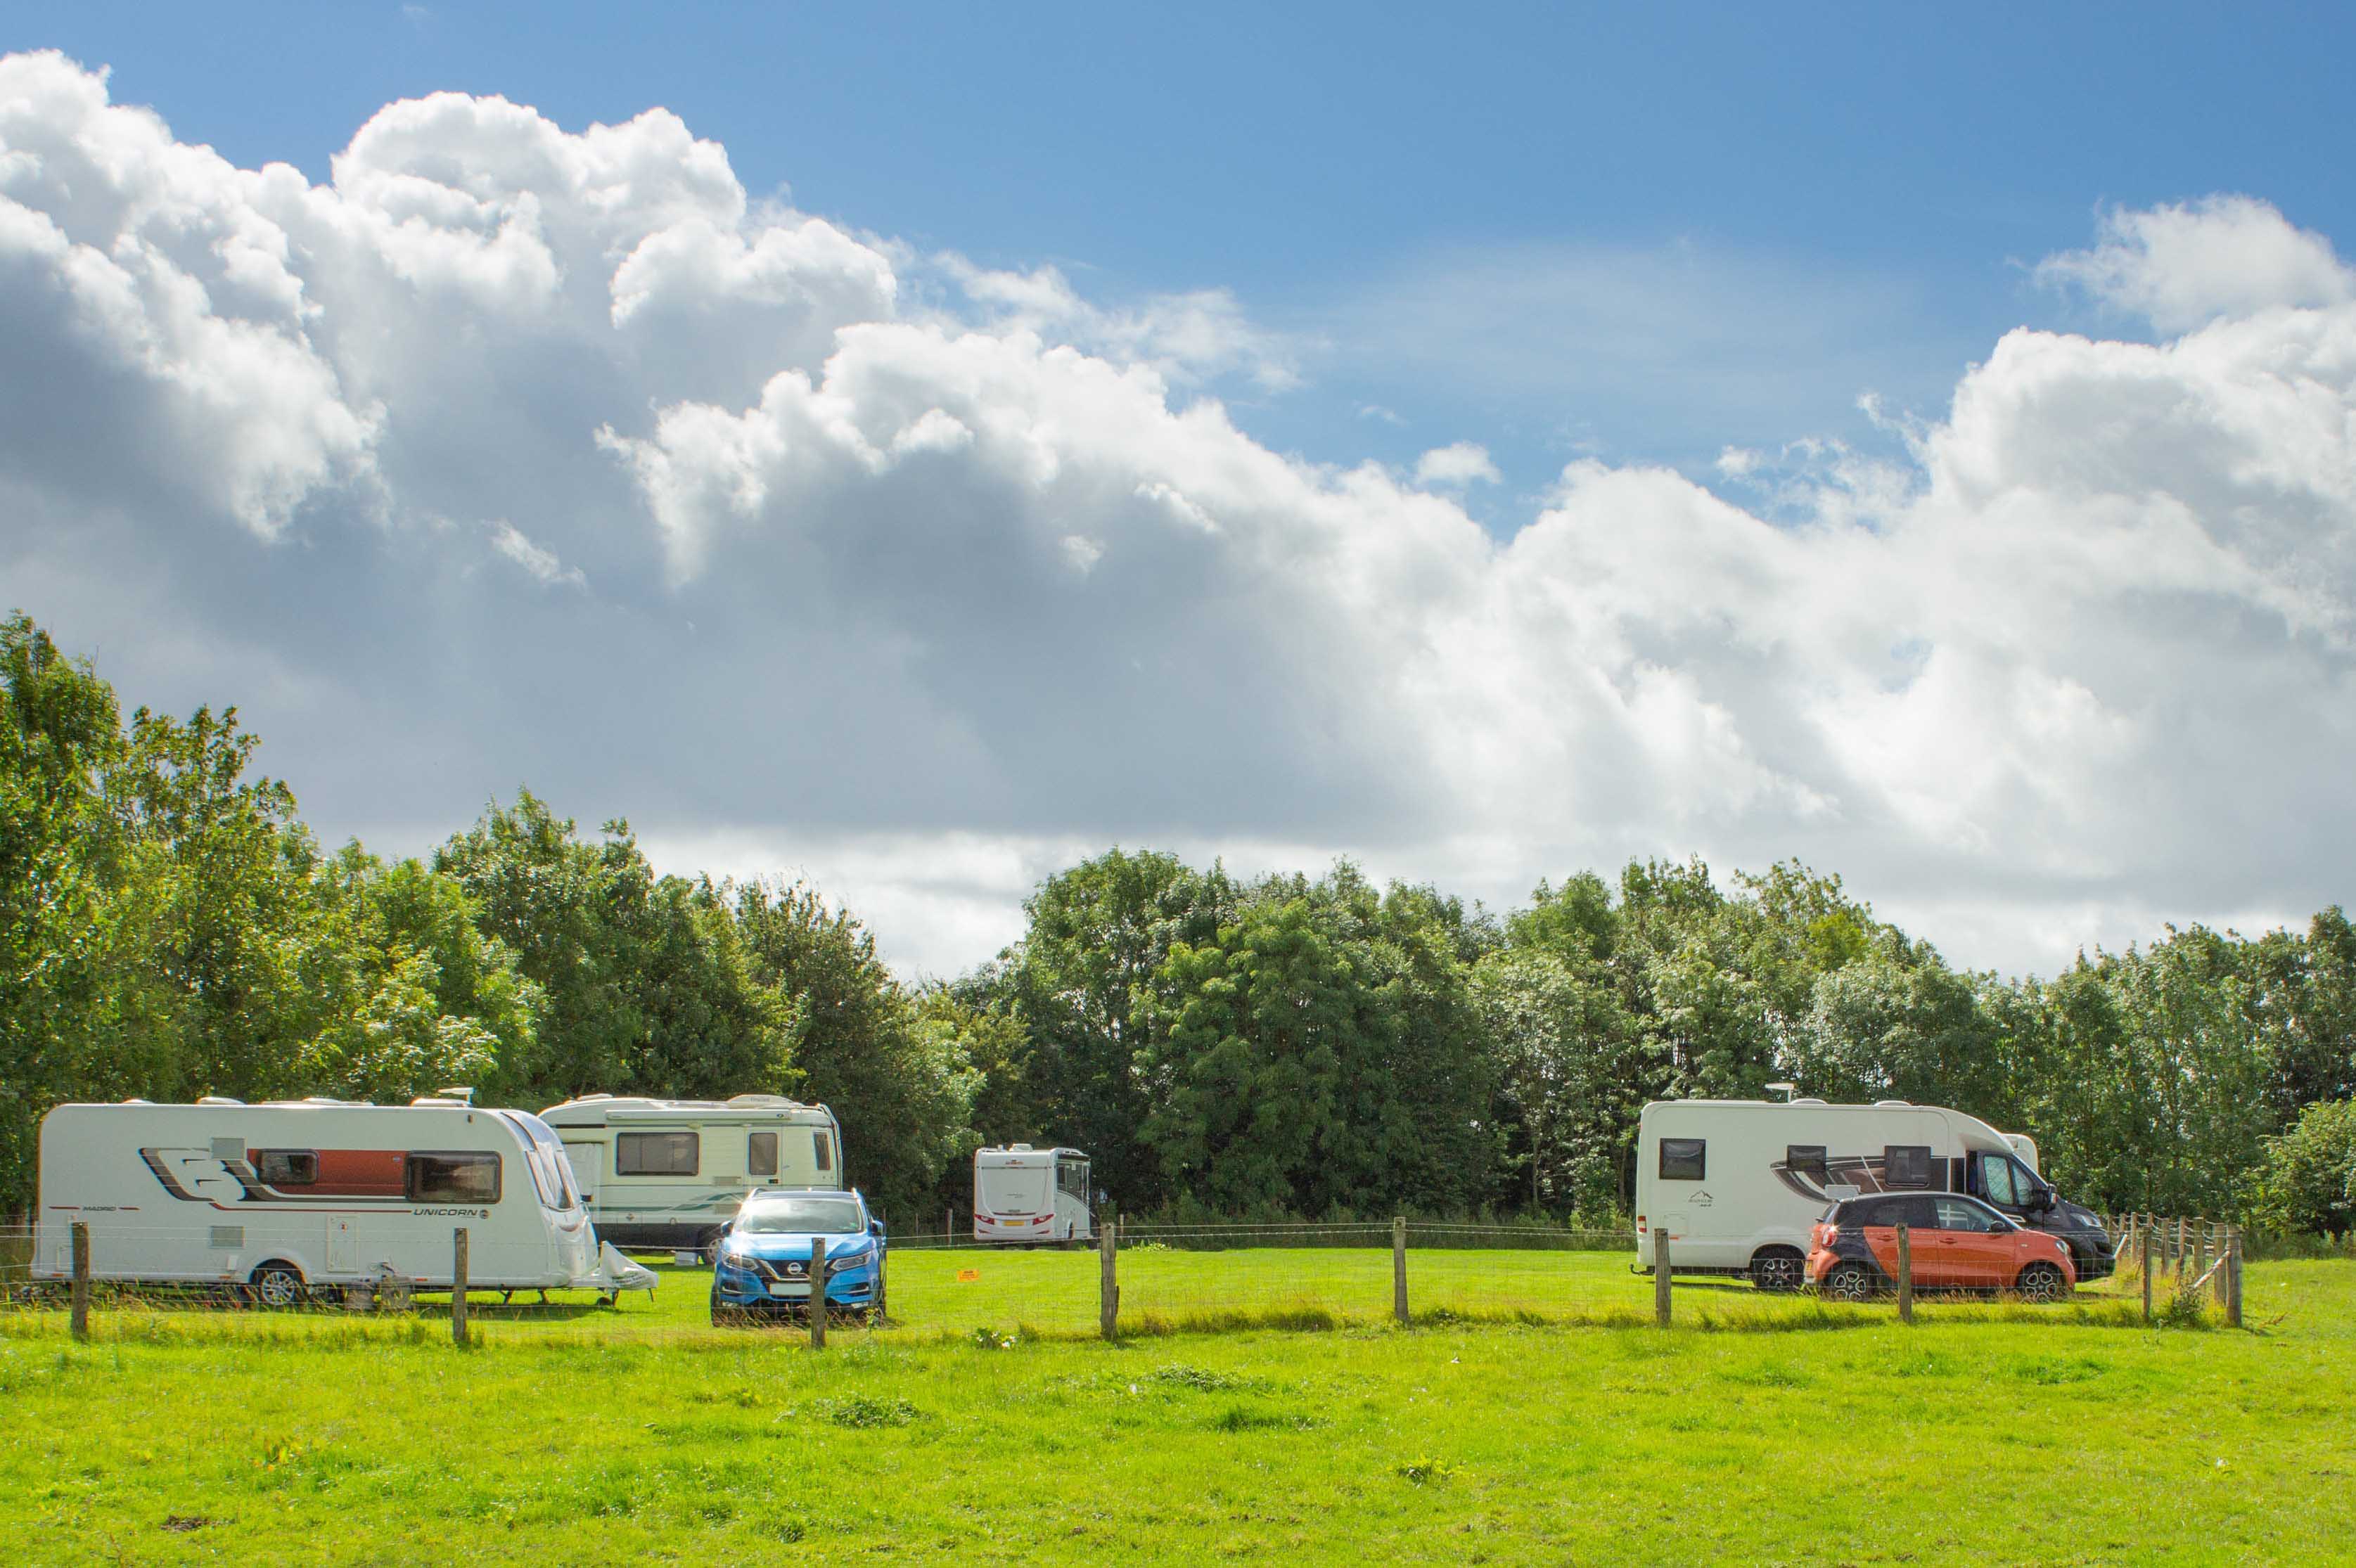 Church Farm Caravan and Motorhome Site is in a quiet location. The site has been designed to offer plenty of room and the up most usability. All facities are dog-friendly